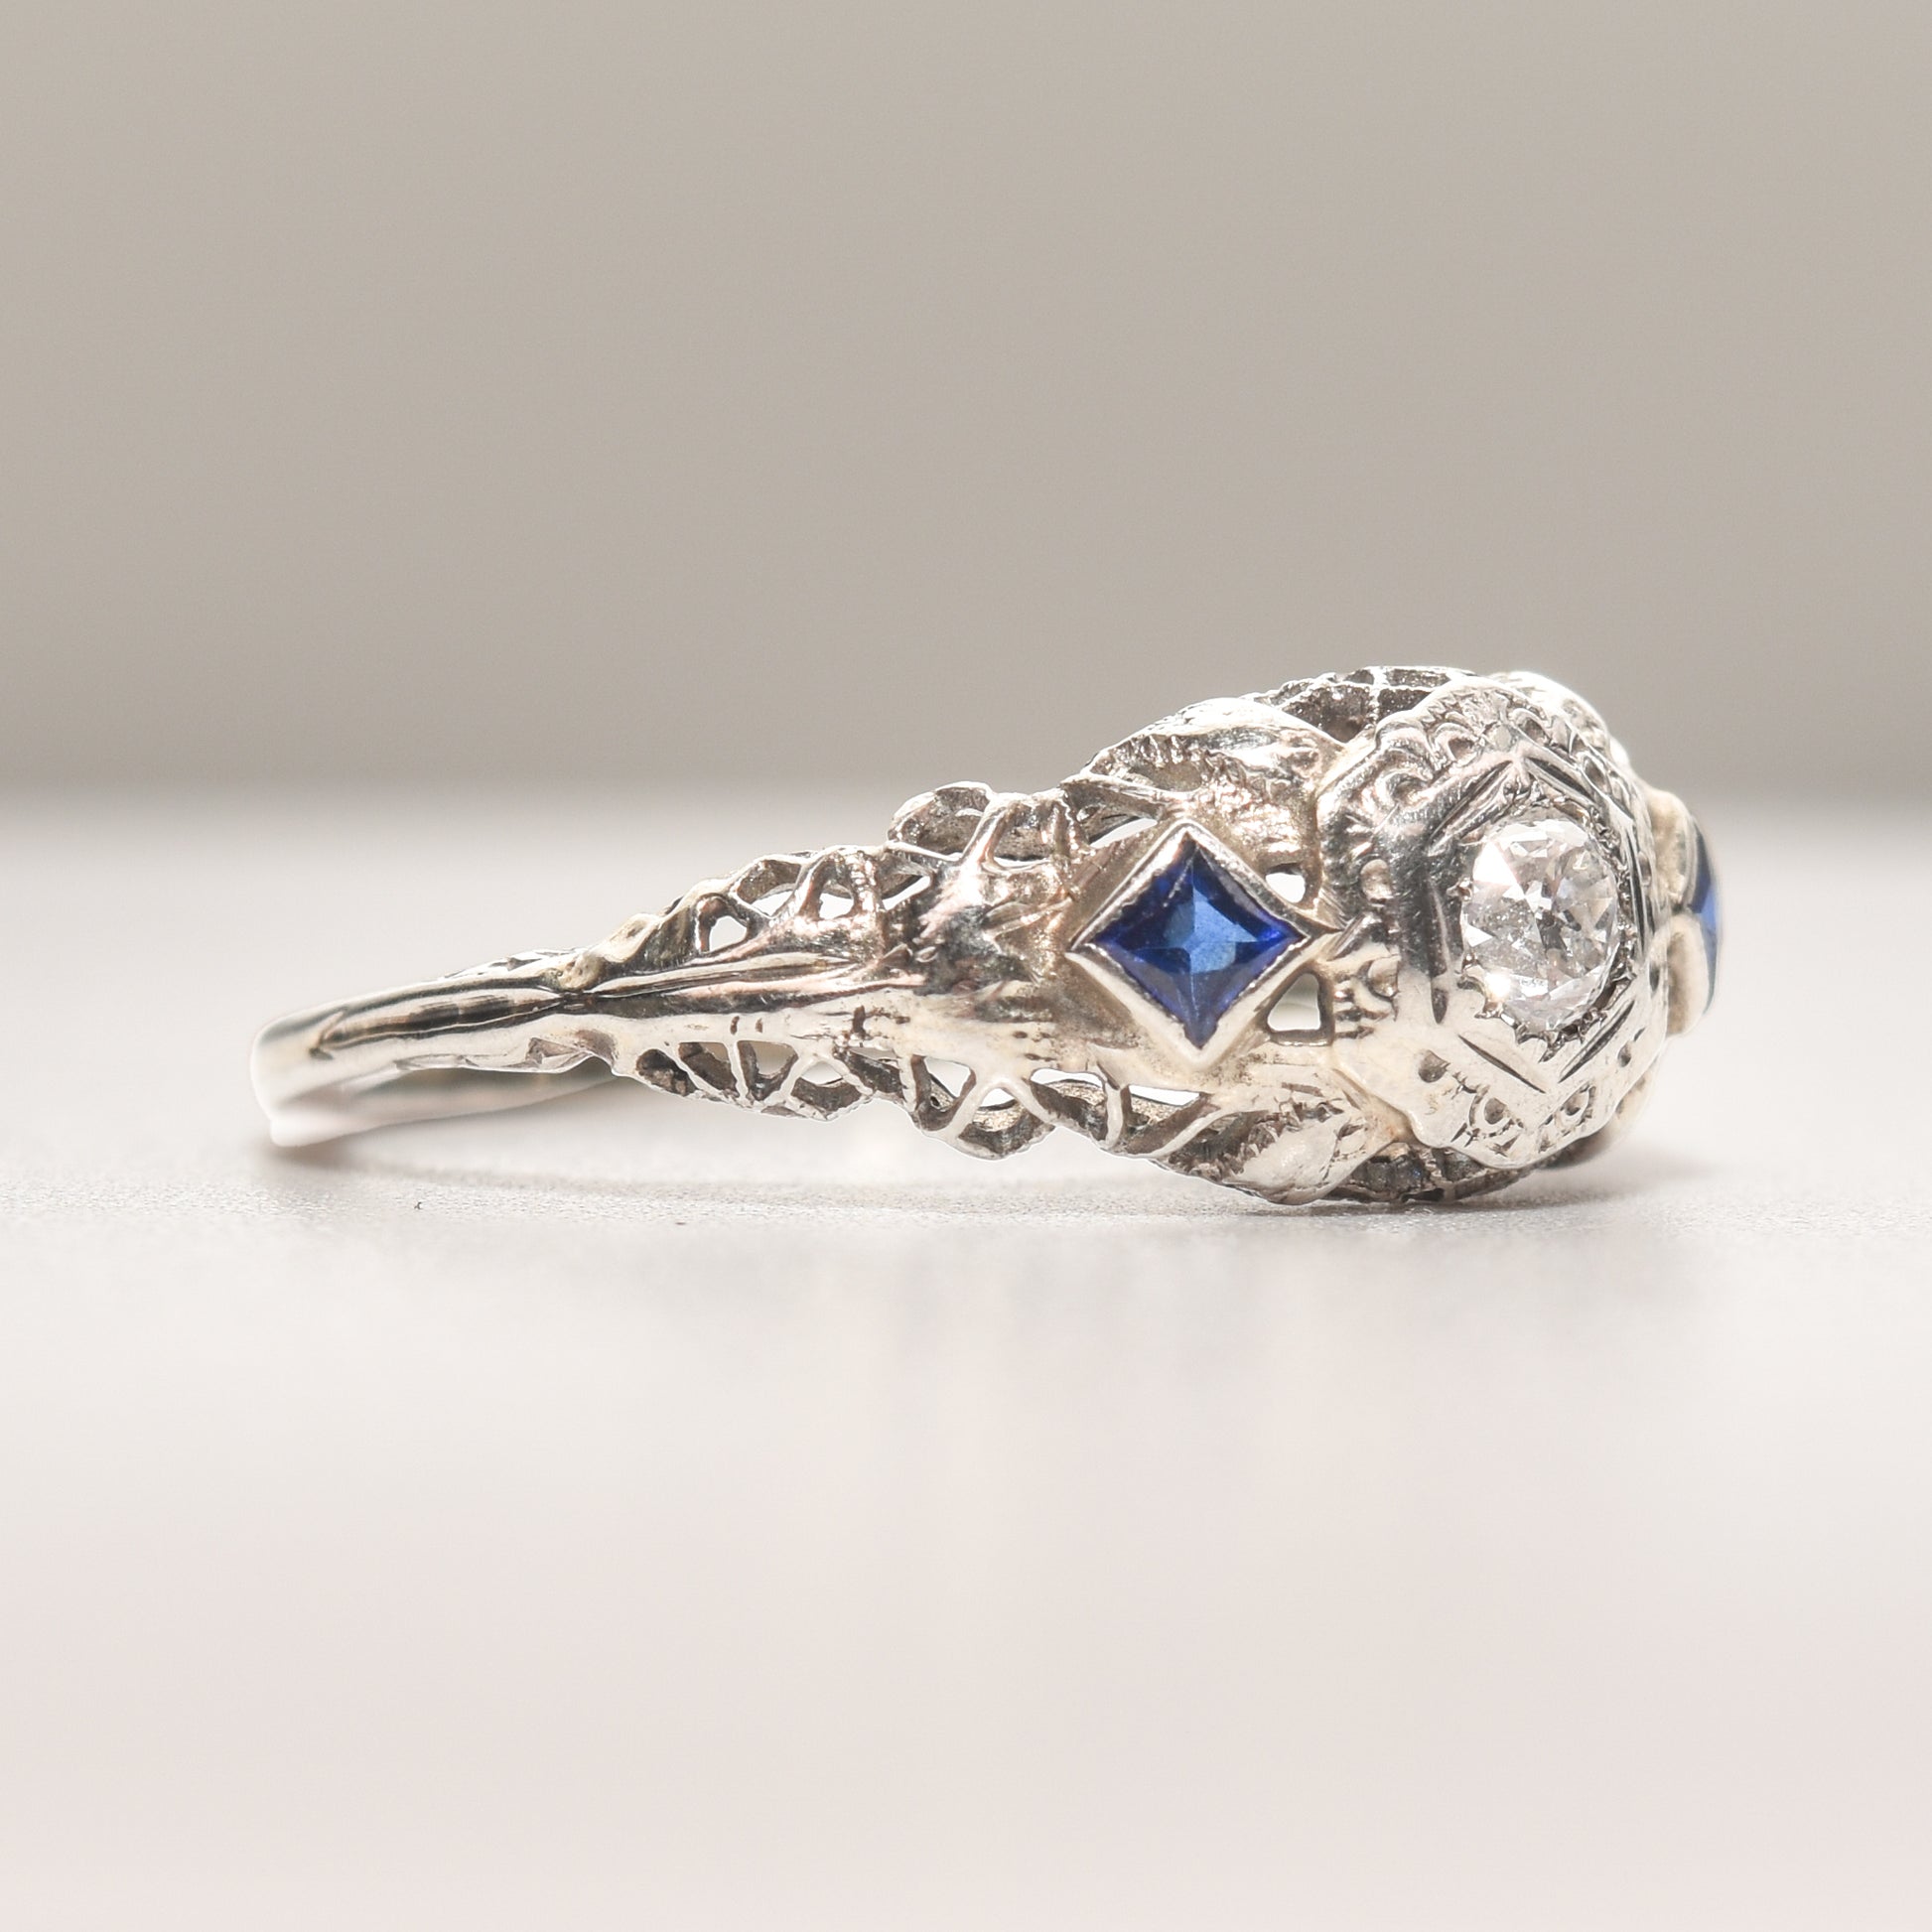 Art Deco 18K white gold diamond and sapphire filigree engagement ring with natural diamonds and synthetic sapphires on a size 6.25 US band, intricate vintage design.